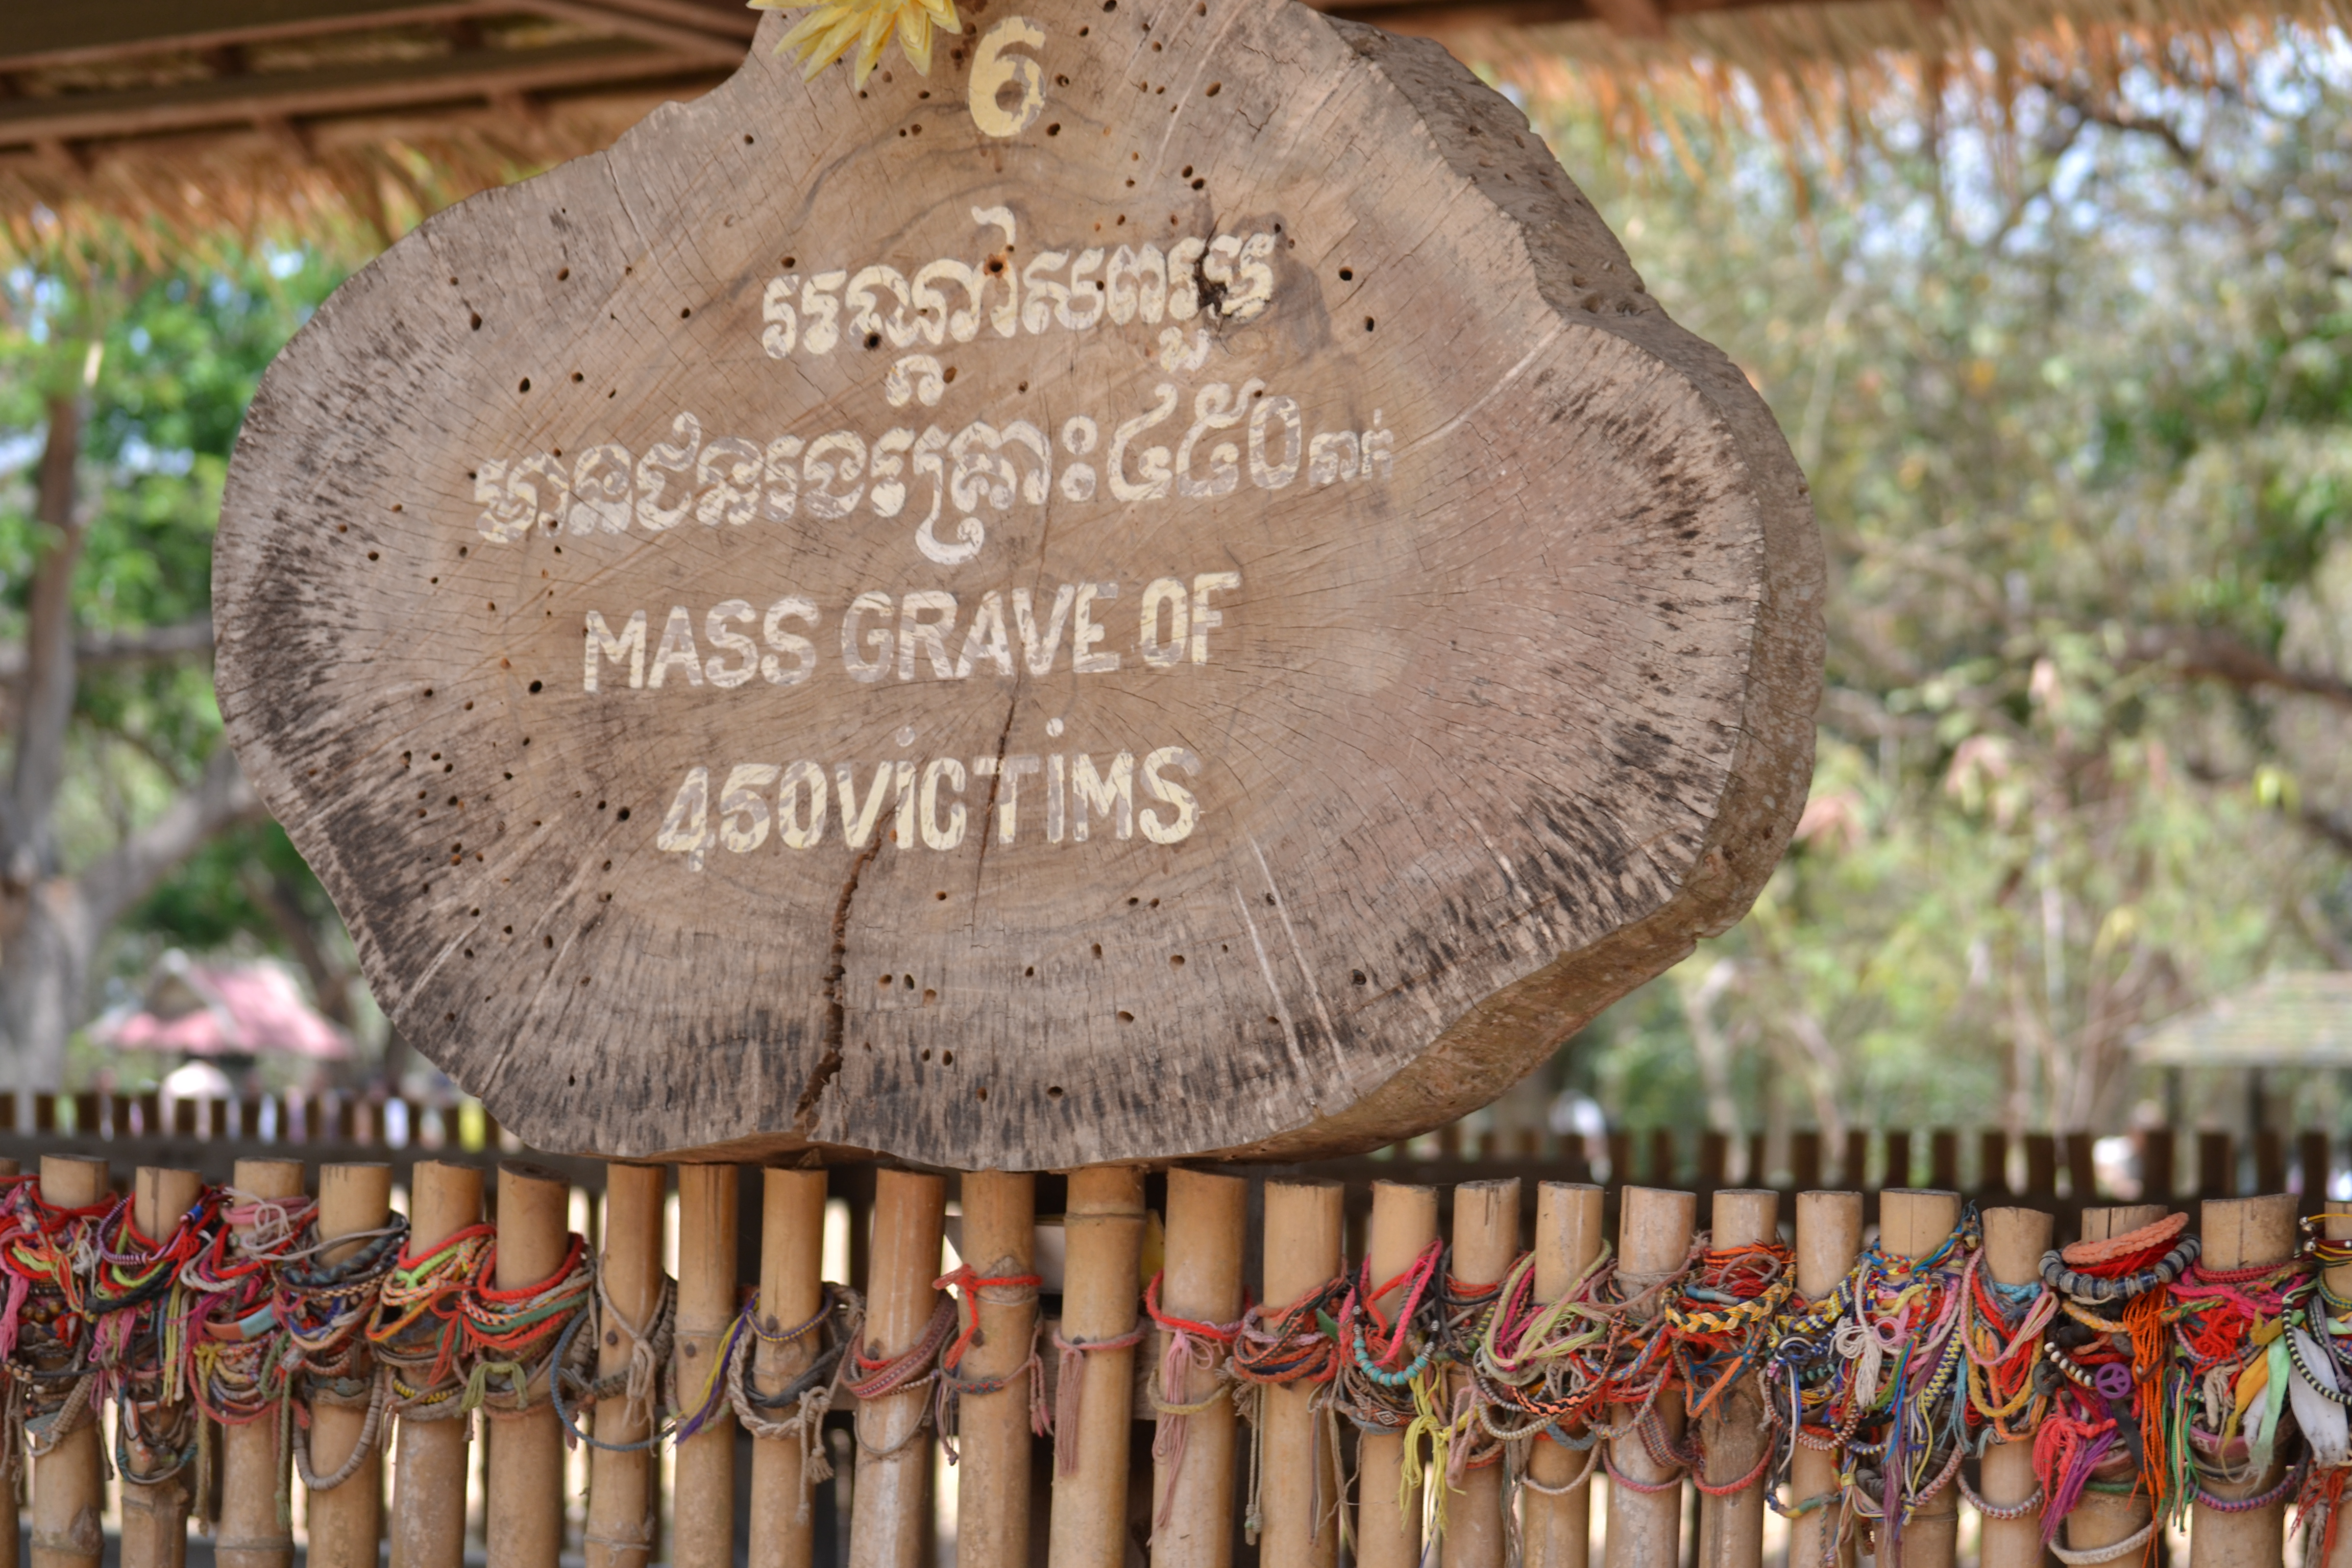 Mass graves exist throughout Cheoung Ek. Many are not yet excavated.